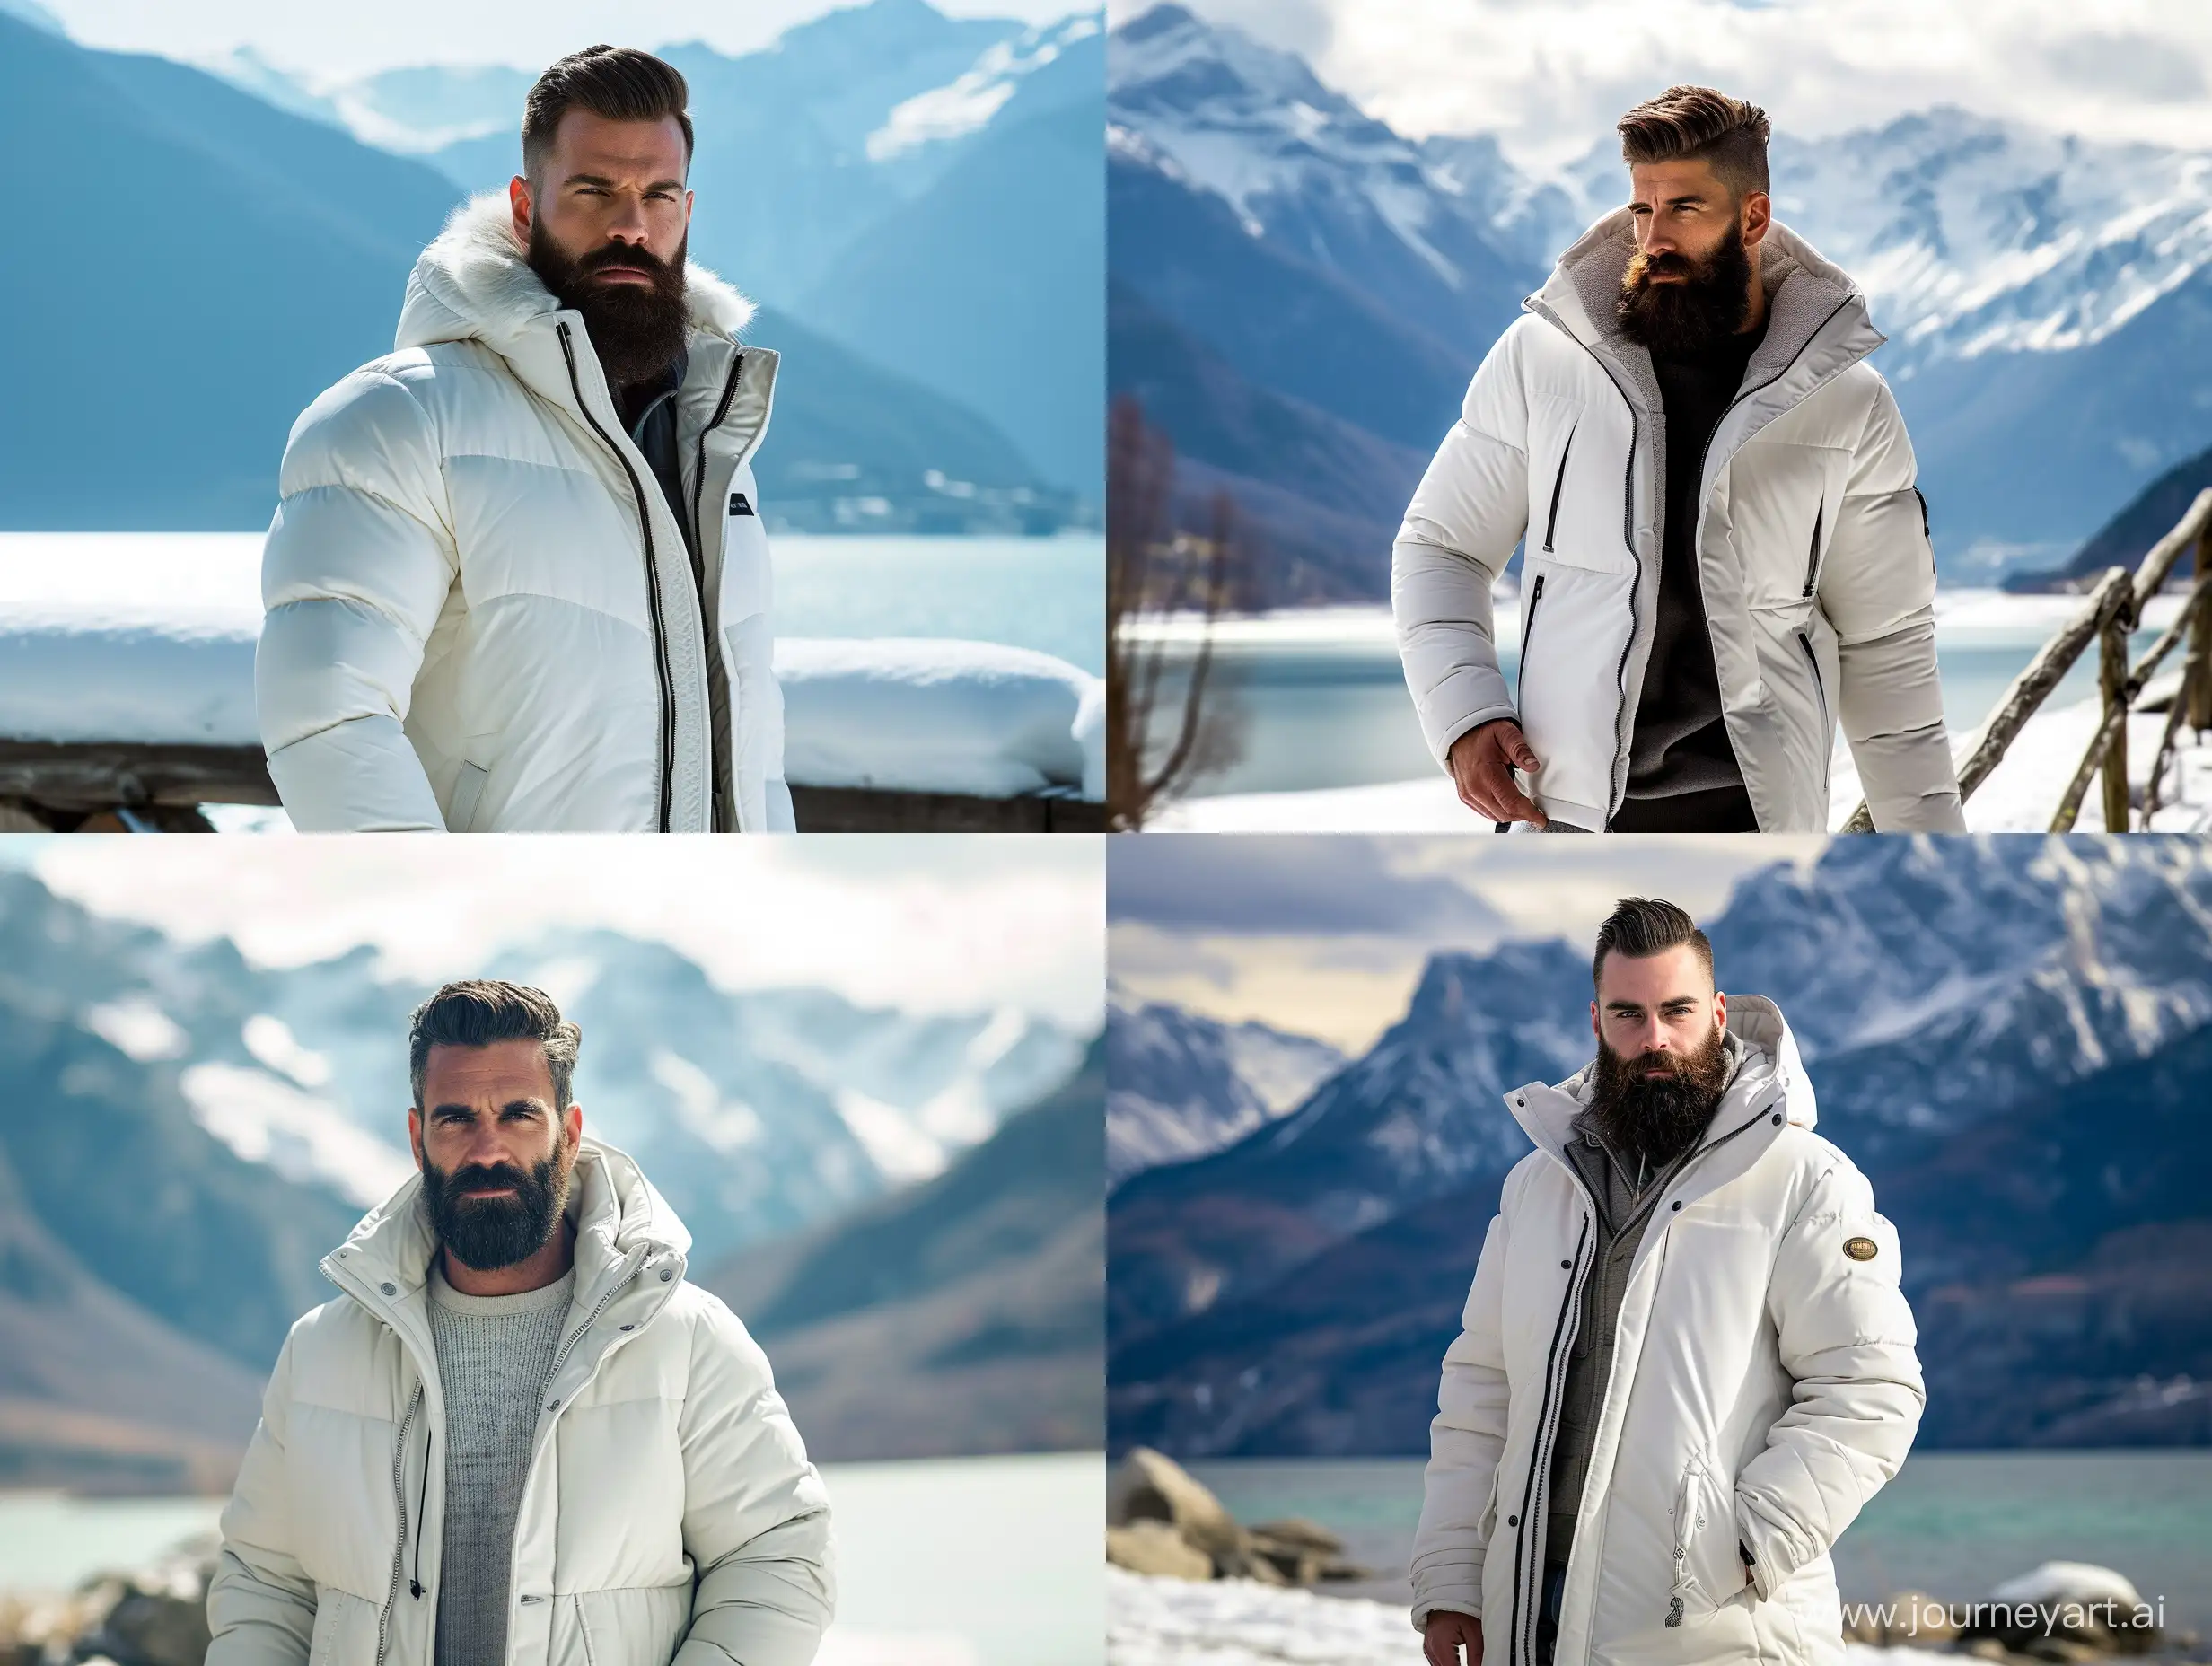 Capture the winter vibe with a real bearded man donned in a stylish white winter jacket, photographed full-body from head to toes. Placed in a setting with a background of mountains and lakes. The natural light highlights the jacket's modern texture. The result is a harmonious blend of contemporary fashion against a winter landscape, where the man's presence stands as a testament to both style and an authentic connection to the seasonal surroundings.